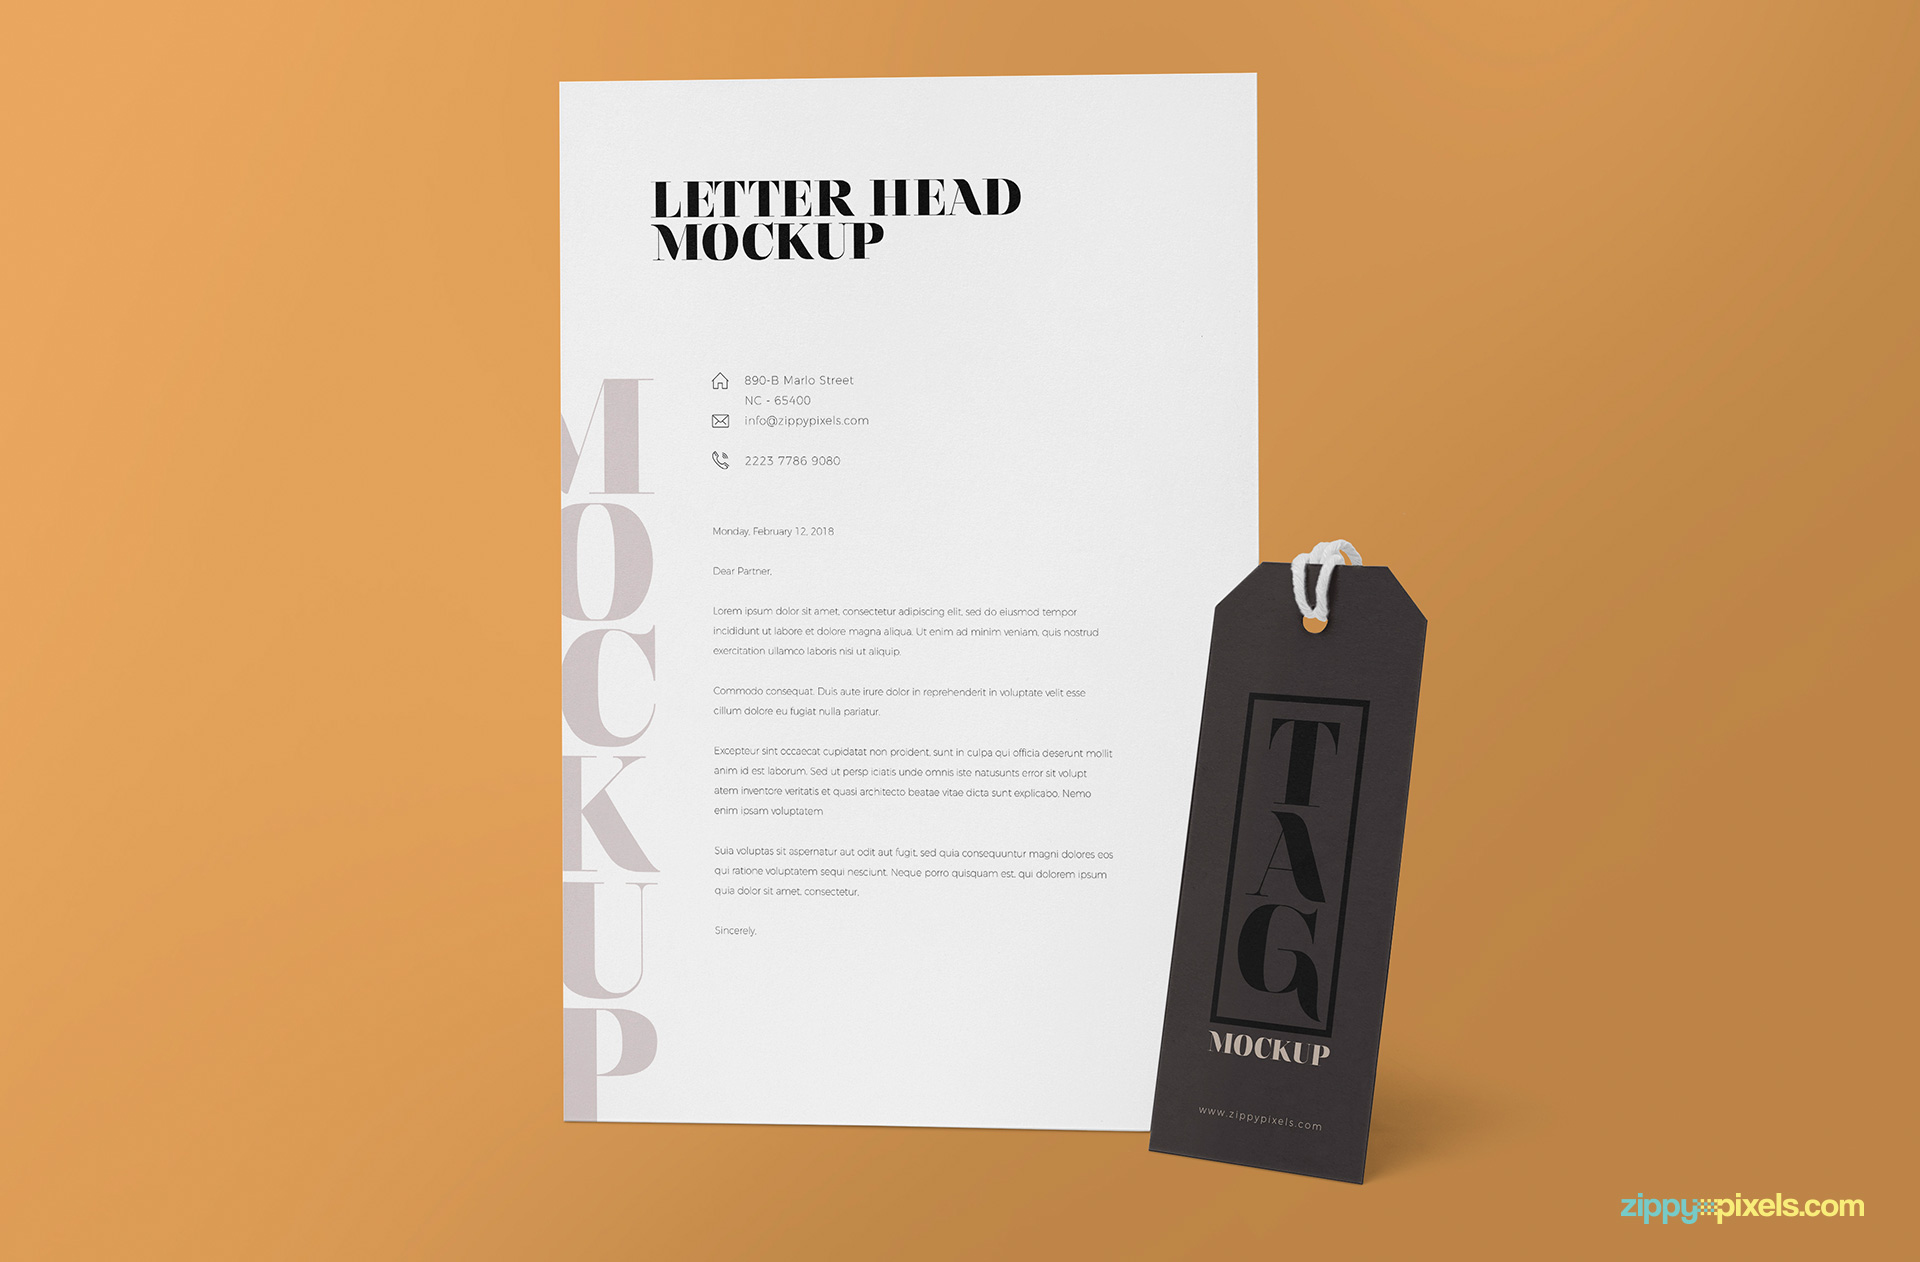 Download this letter mockup free PSD.